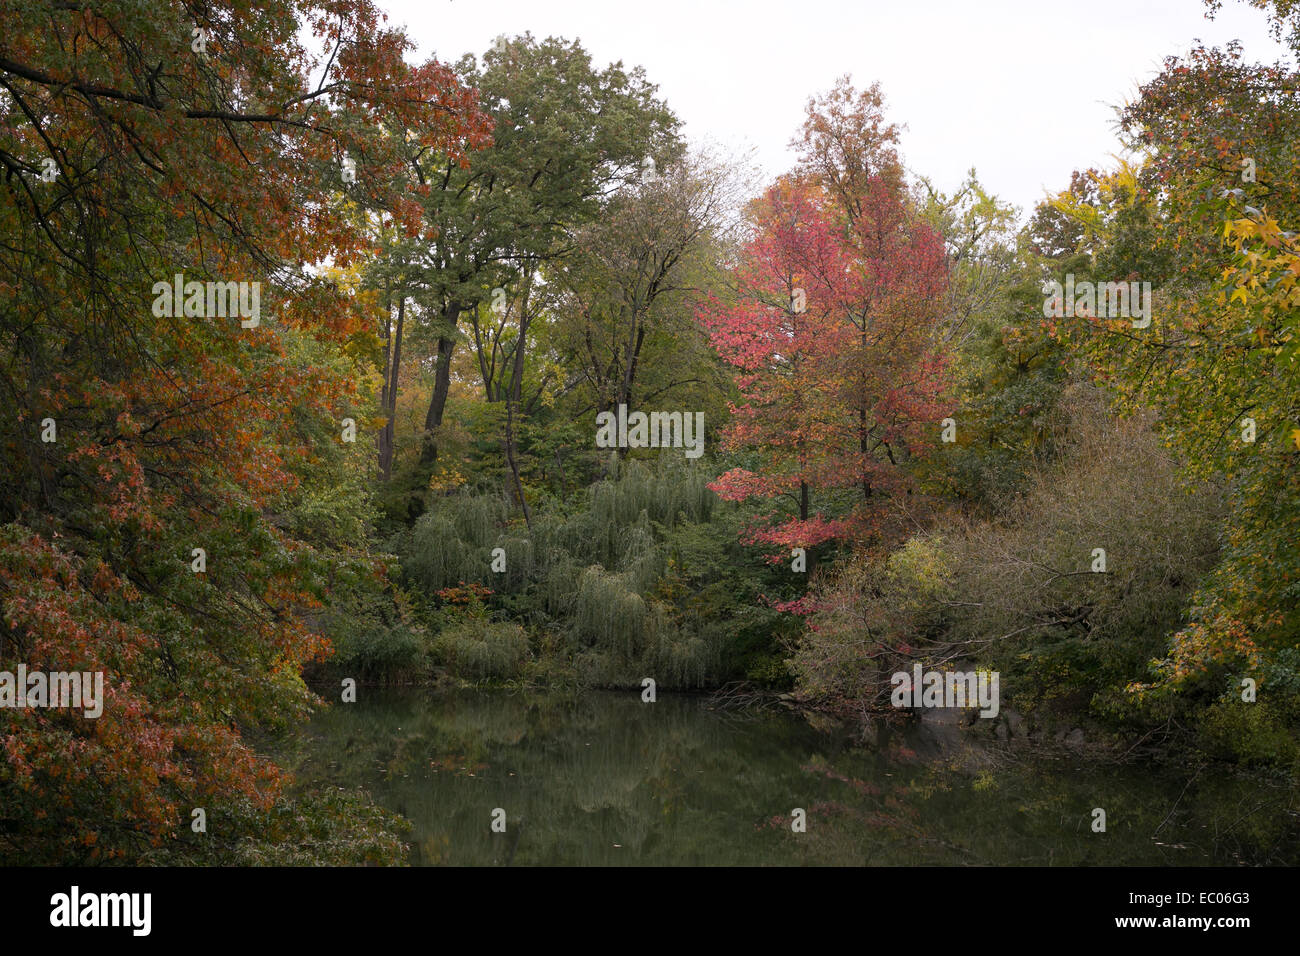 A scenic setting of trees around a pond in Central Park, New York. Stock Photo